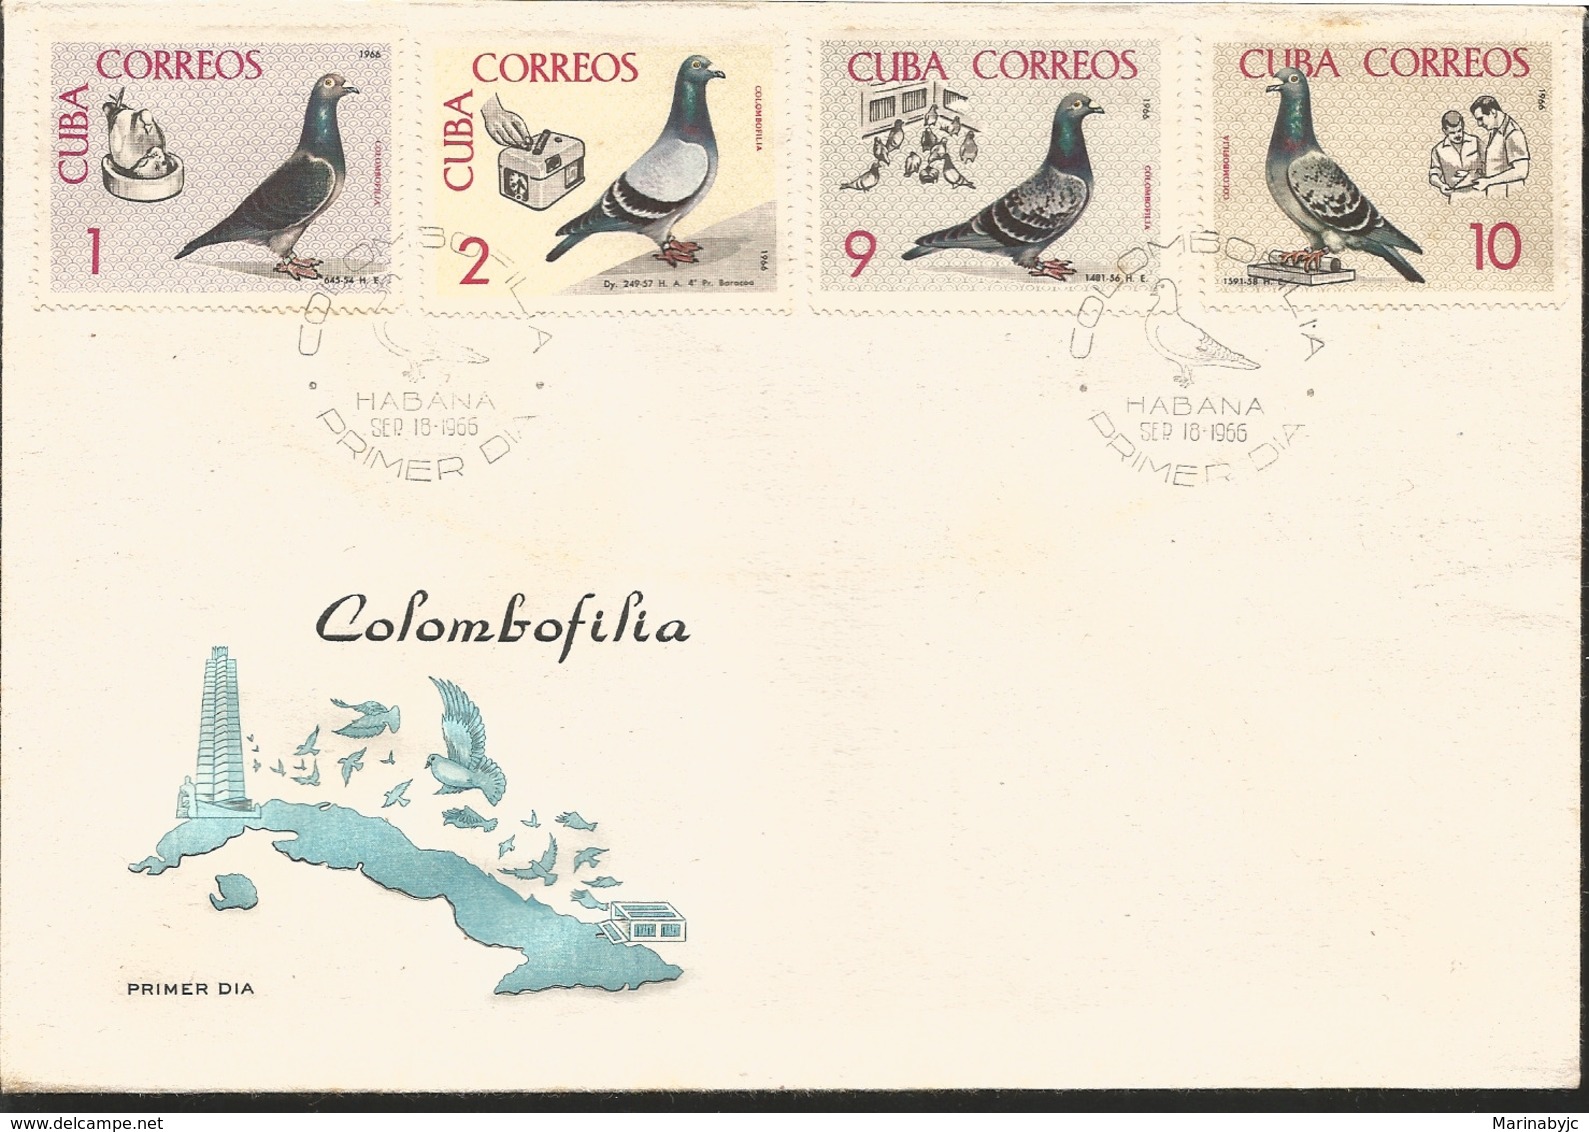 V) 1966 CARIBBEAN, BREEDING MESSENGER PIGEONS, PIGEONS IN YARD, TWO MEN, MESSAGE, WITH SLOGAN CANCELATION IN BLACK, FDC - Lettres & Documents